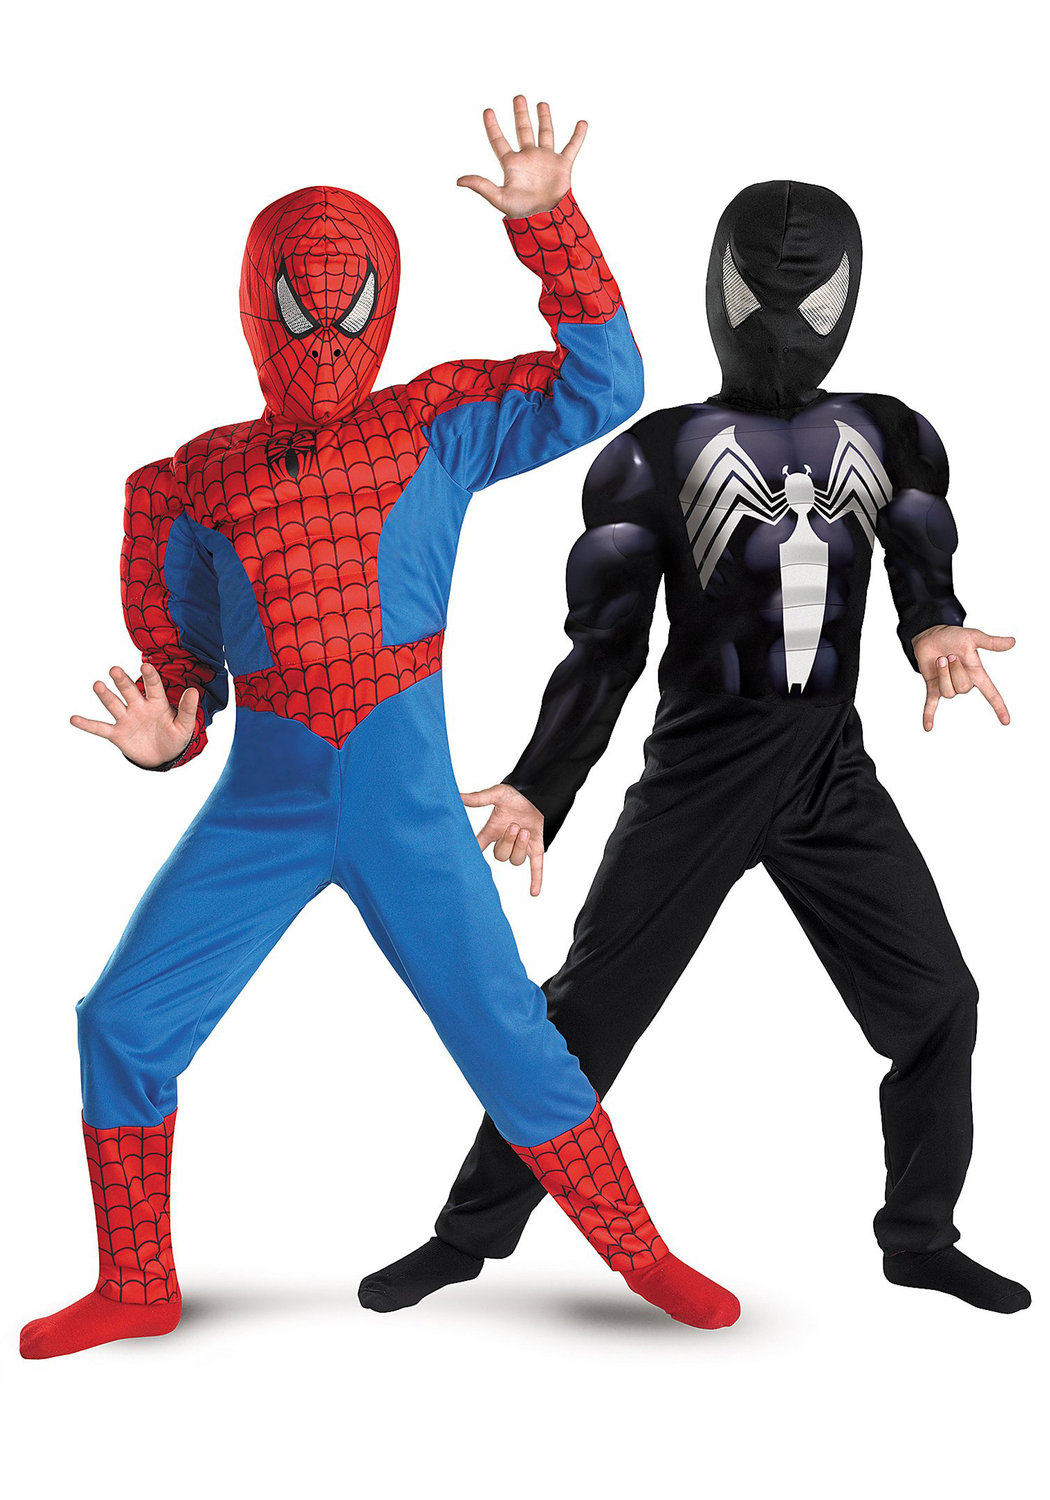 Red to Black Spiderman costume